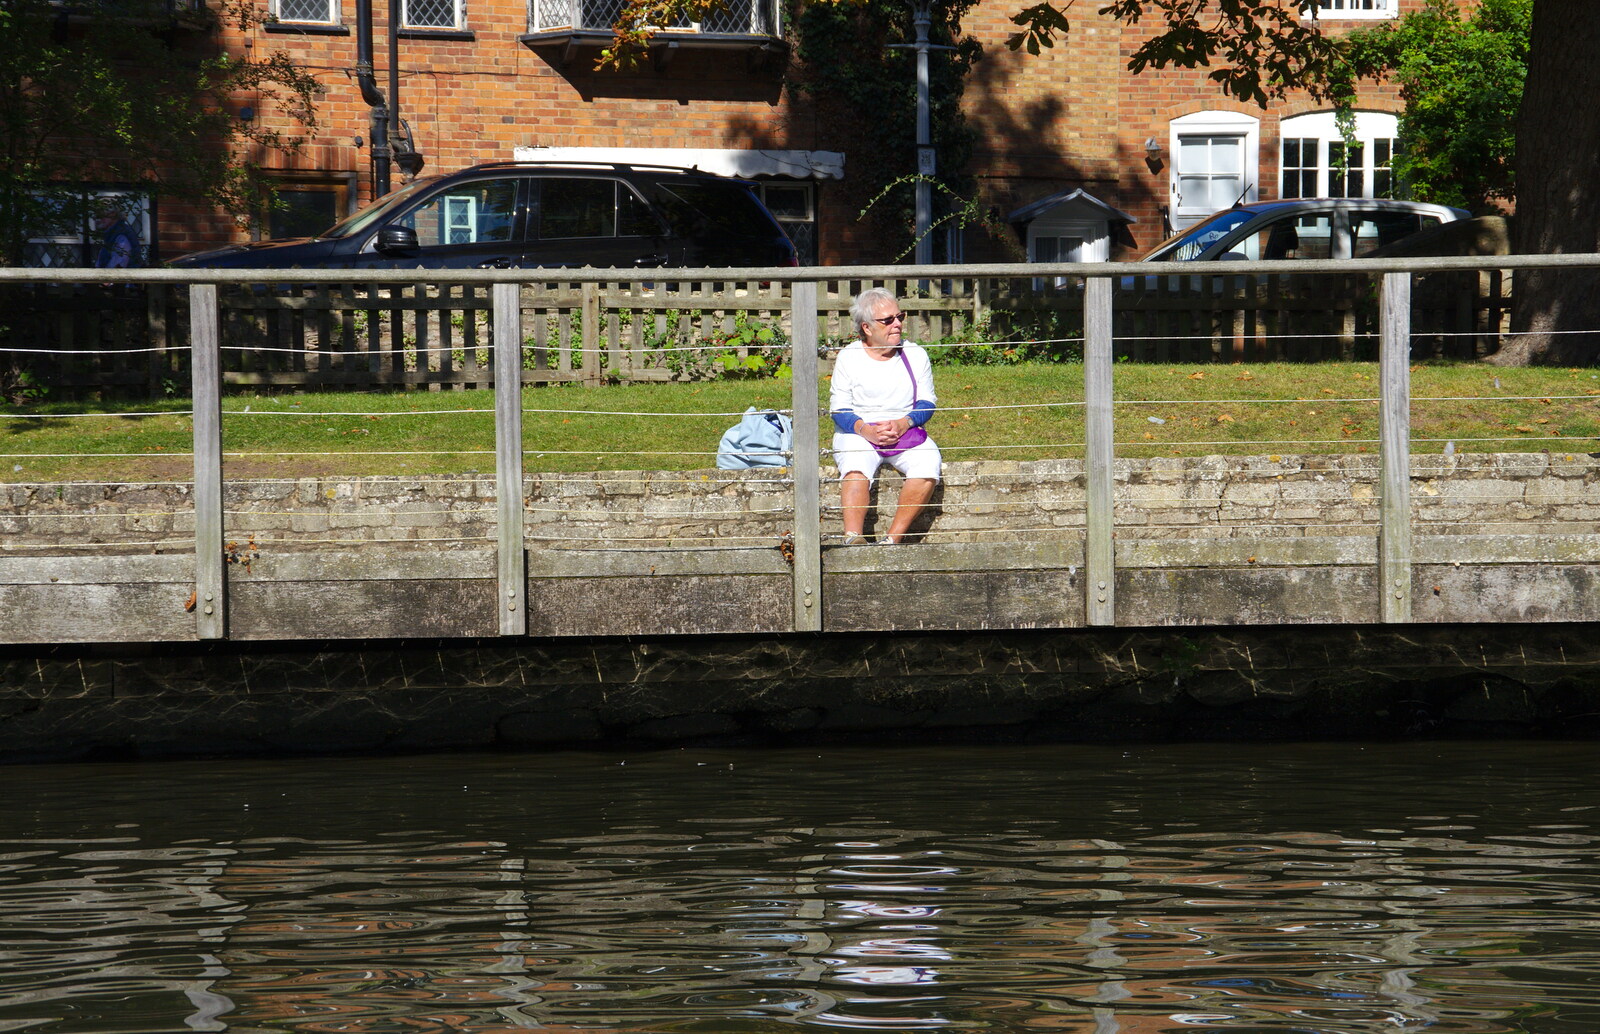 Someone contemplates the River Avon (or River River) from A Boat Trip on the River, Stratford upon Avon, Warwickshire - 14th September 2019